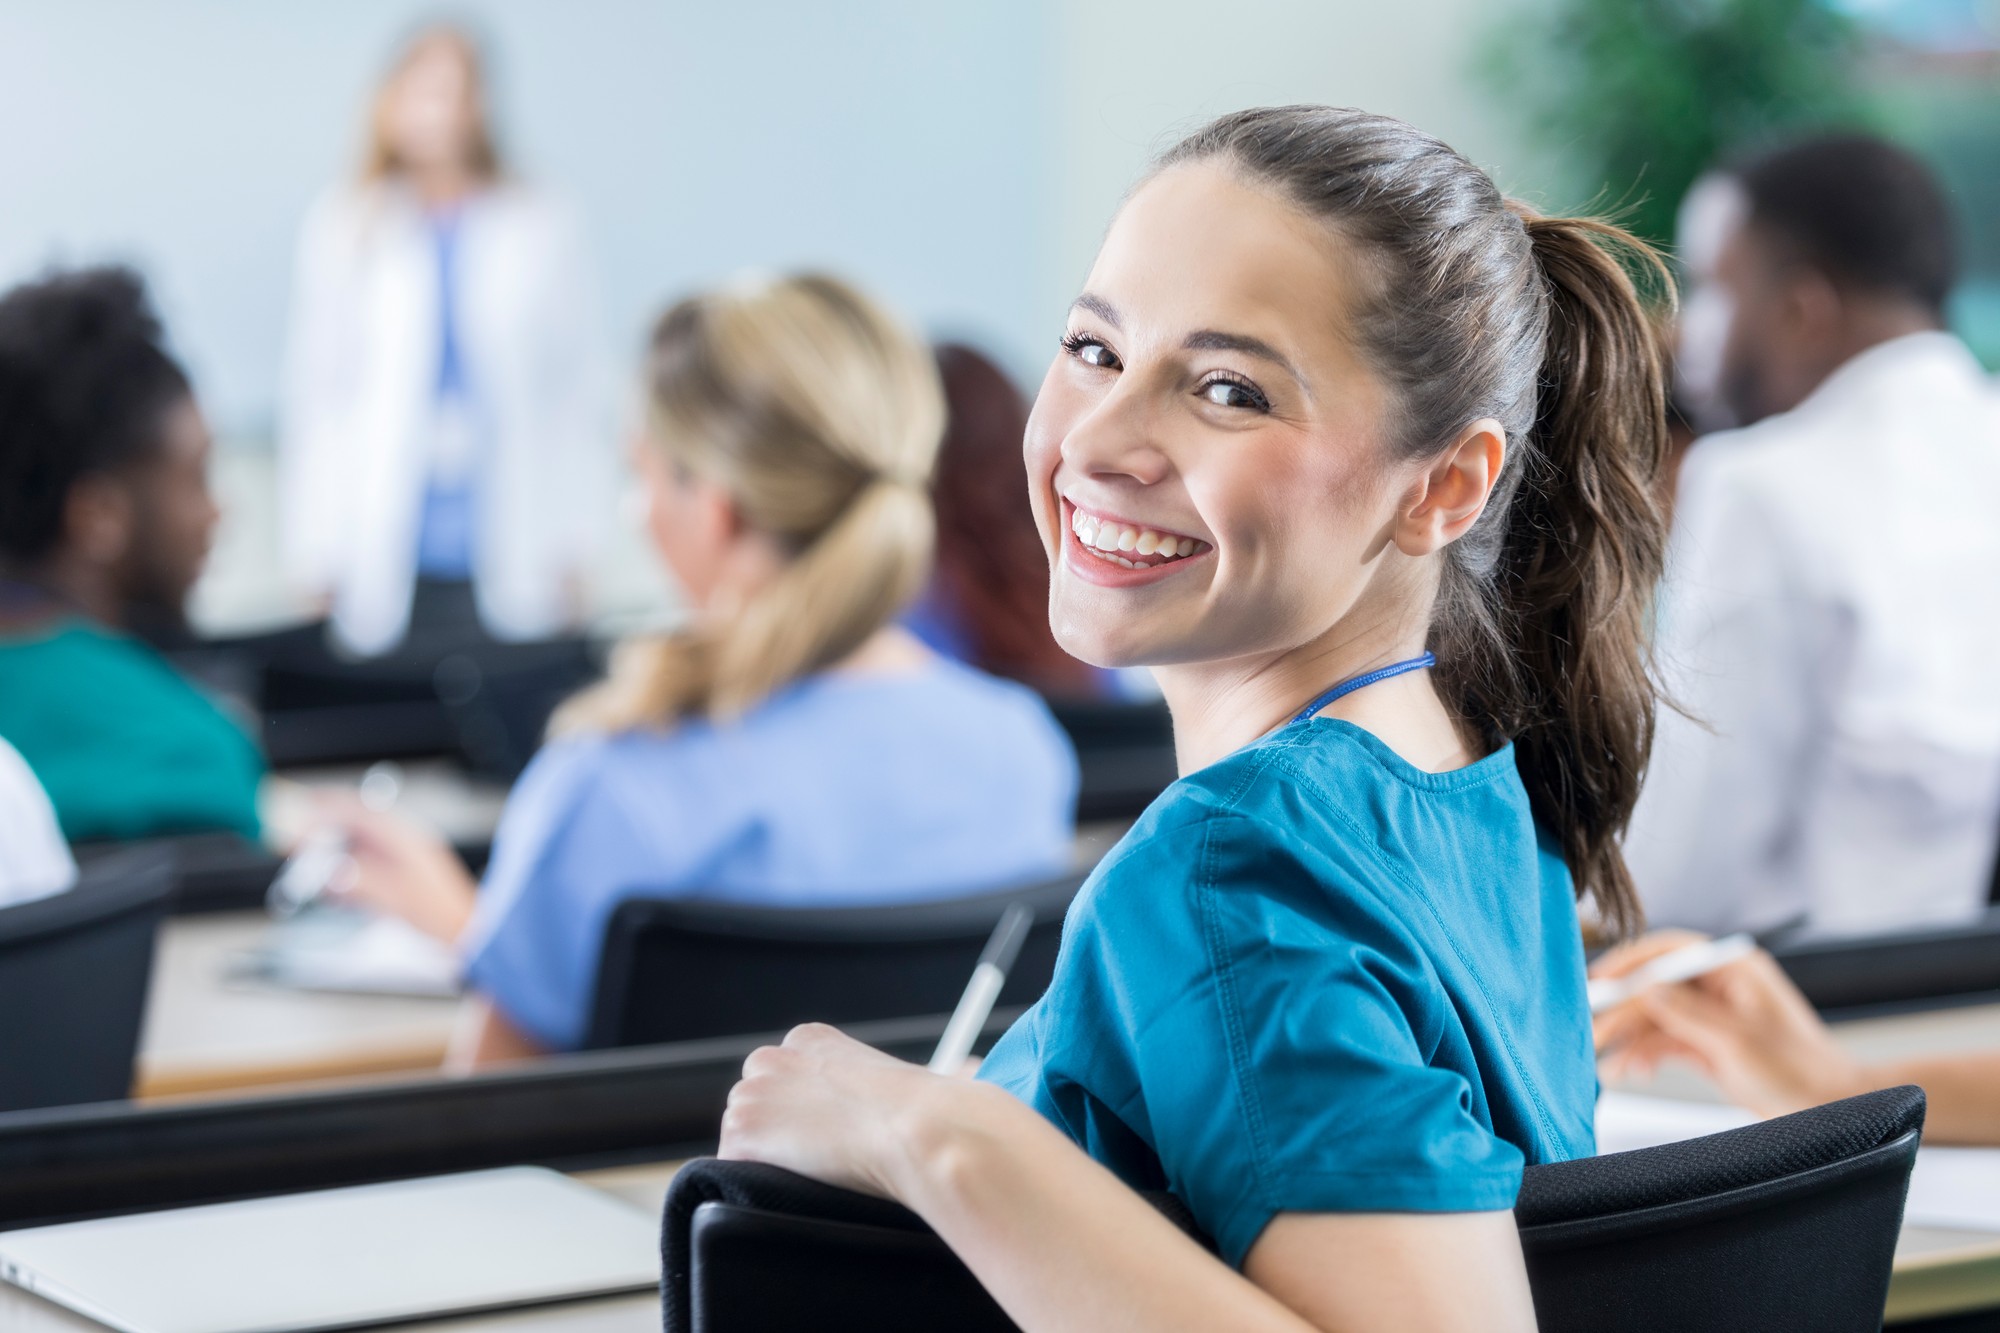 Cheerful female medical student in the classroom